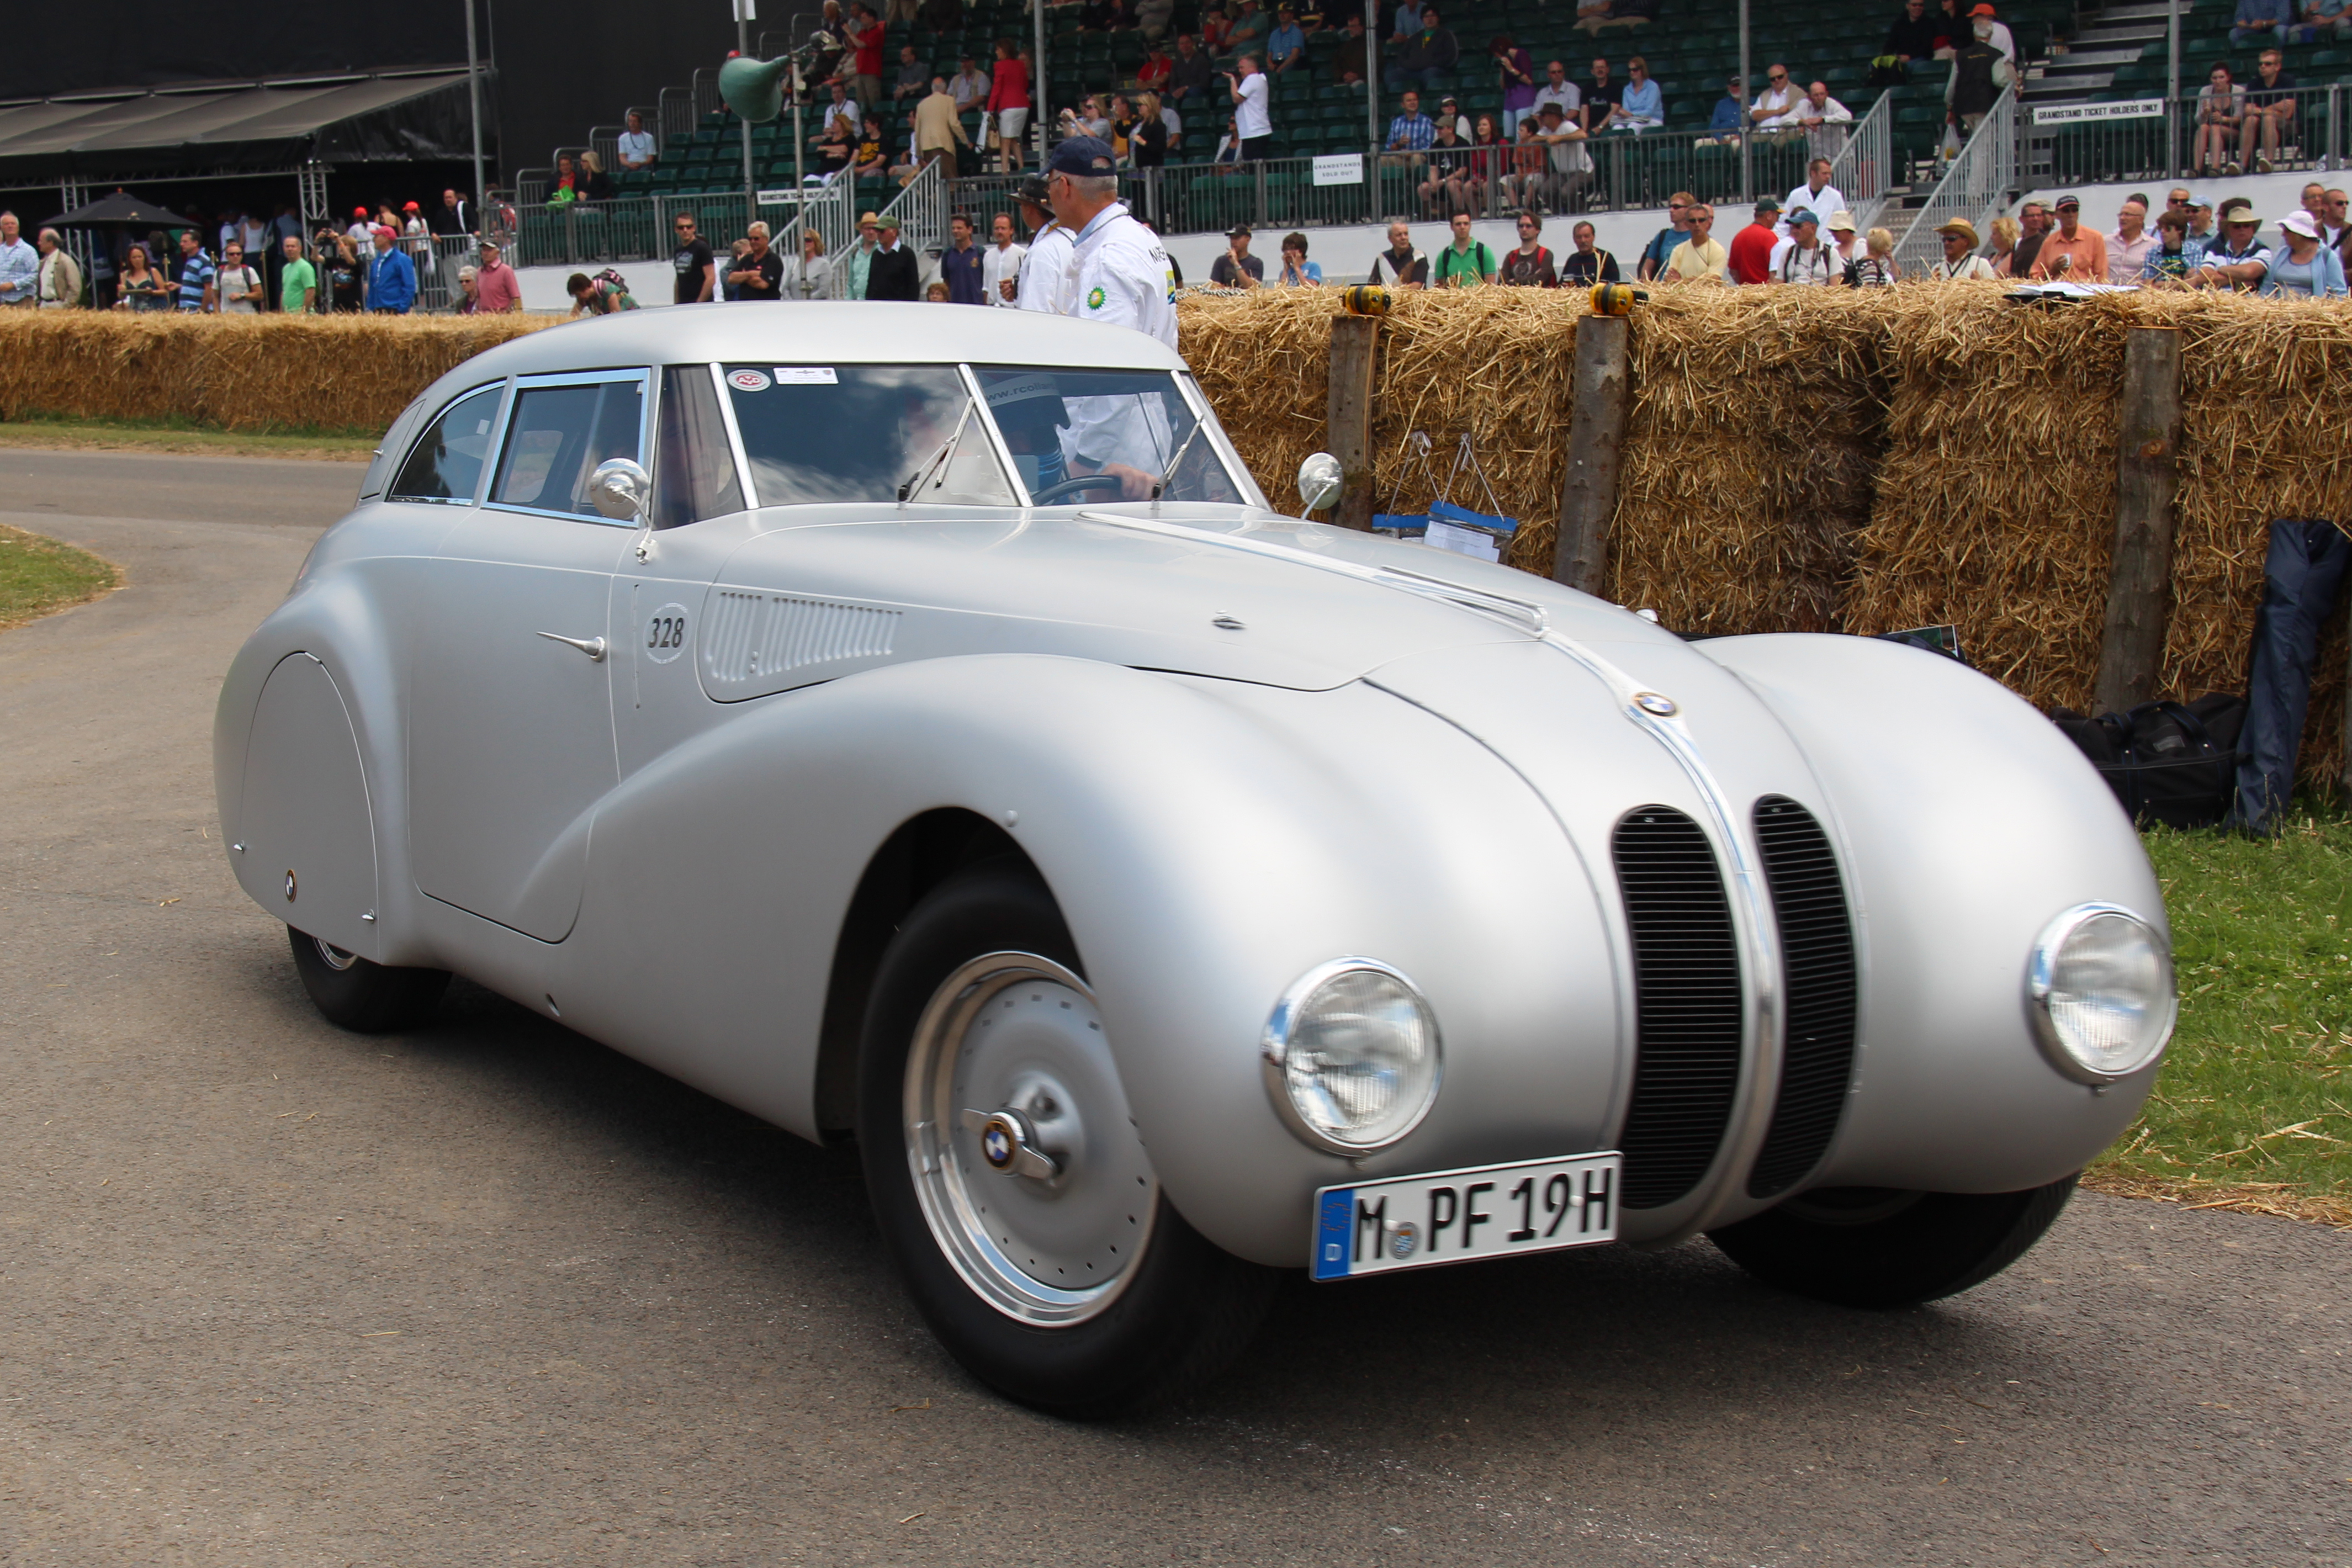 89 BMW 328 Mille Miglia Kamm Coupe (1939) | Flickr - Photo Sharing!